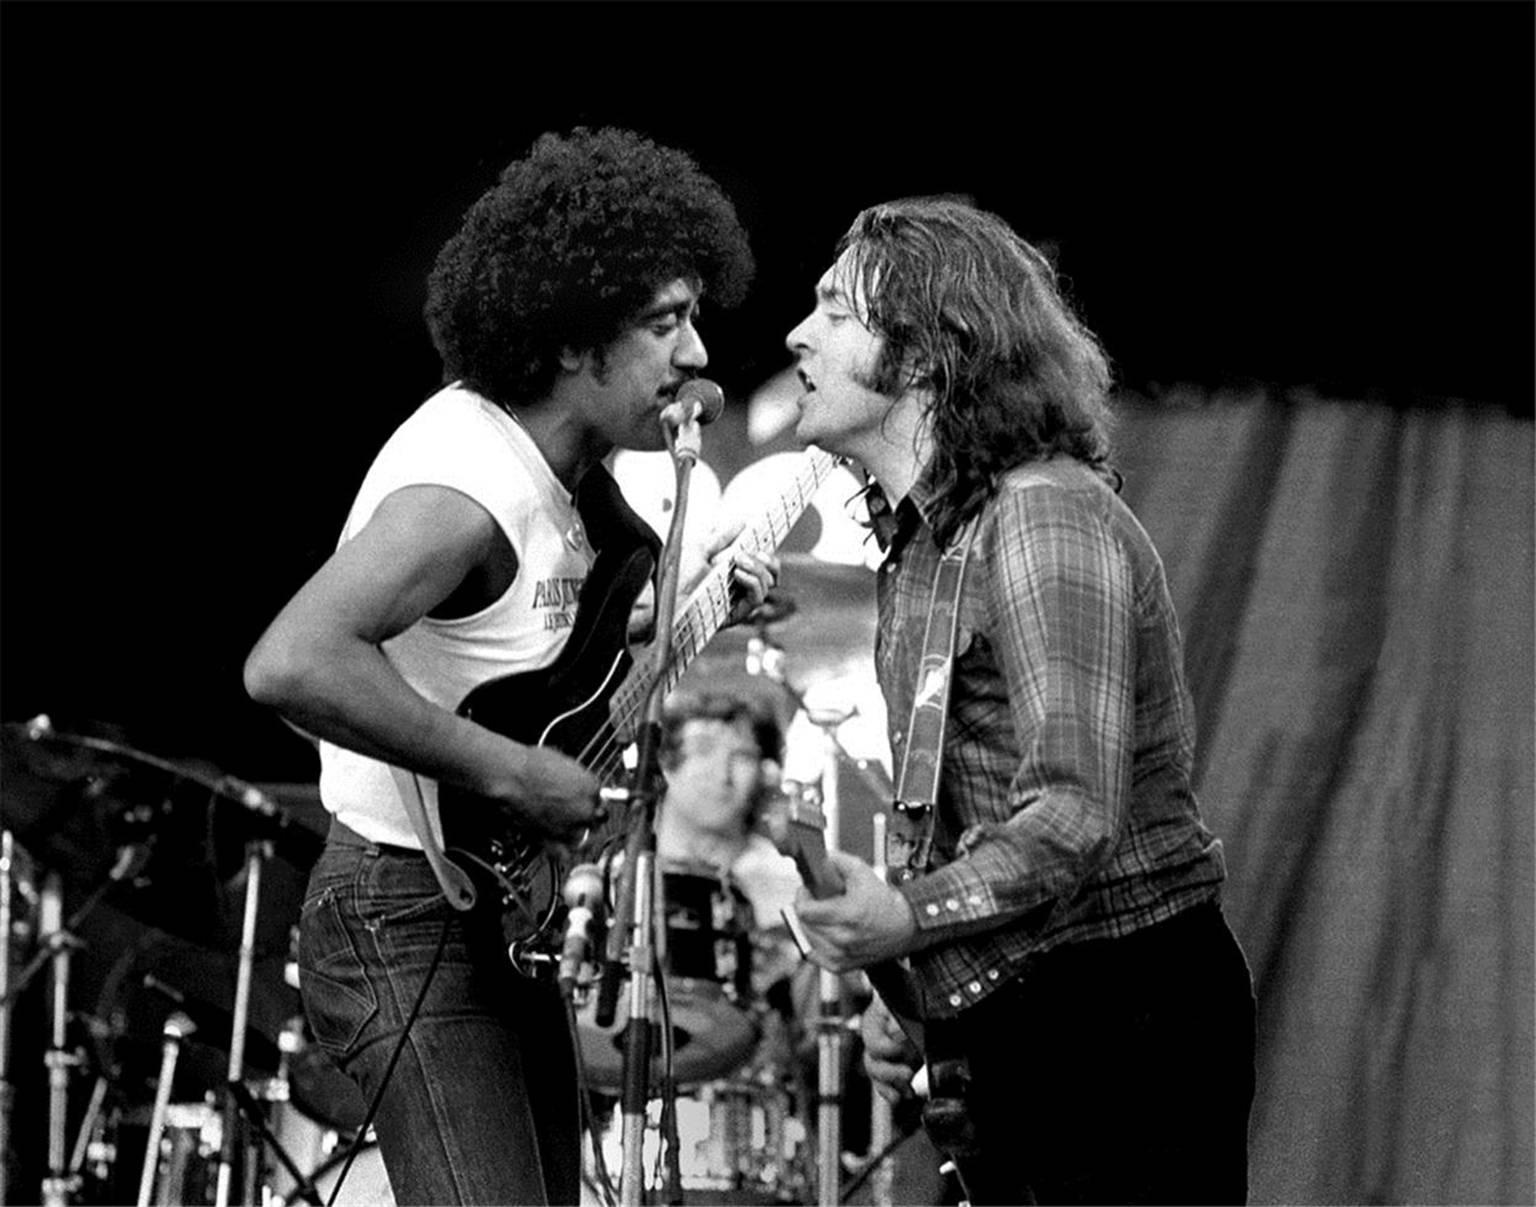 Colm Henry Black and White Photograph - Philip Lynott and Rory Gallagher together in 1982